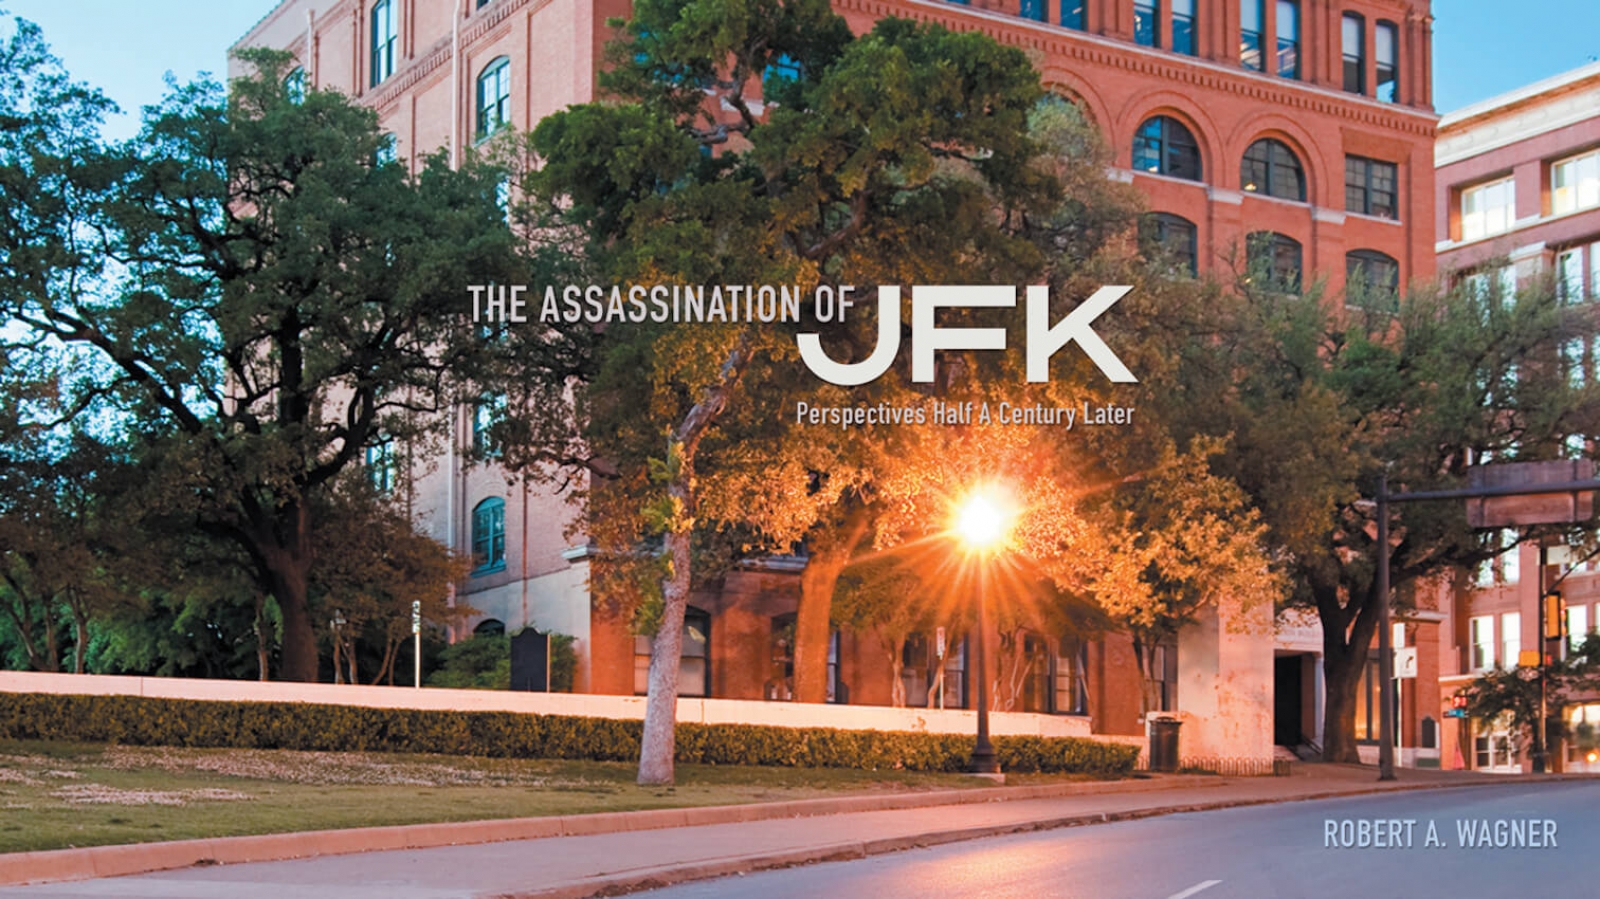 Robert A. Wagner, The Assassination of JFK: Perspectives Half A Century Later